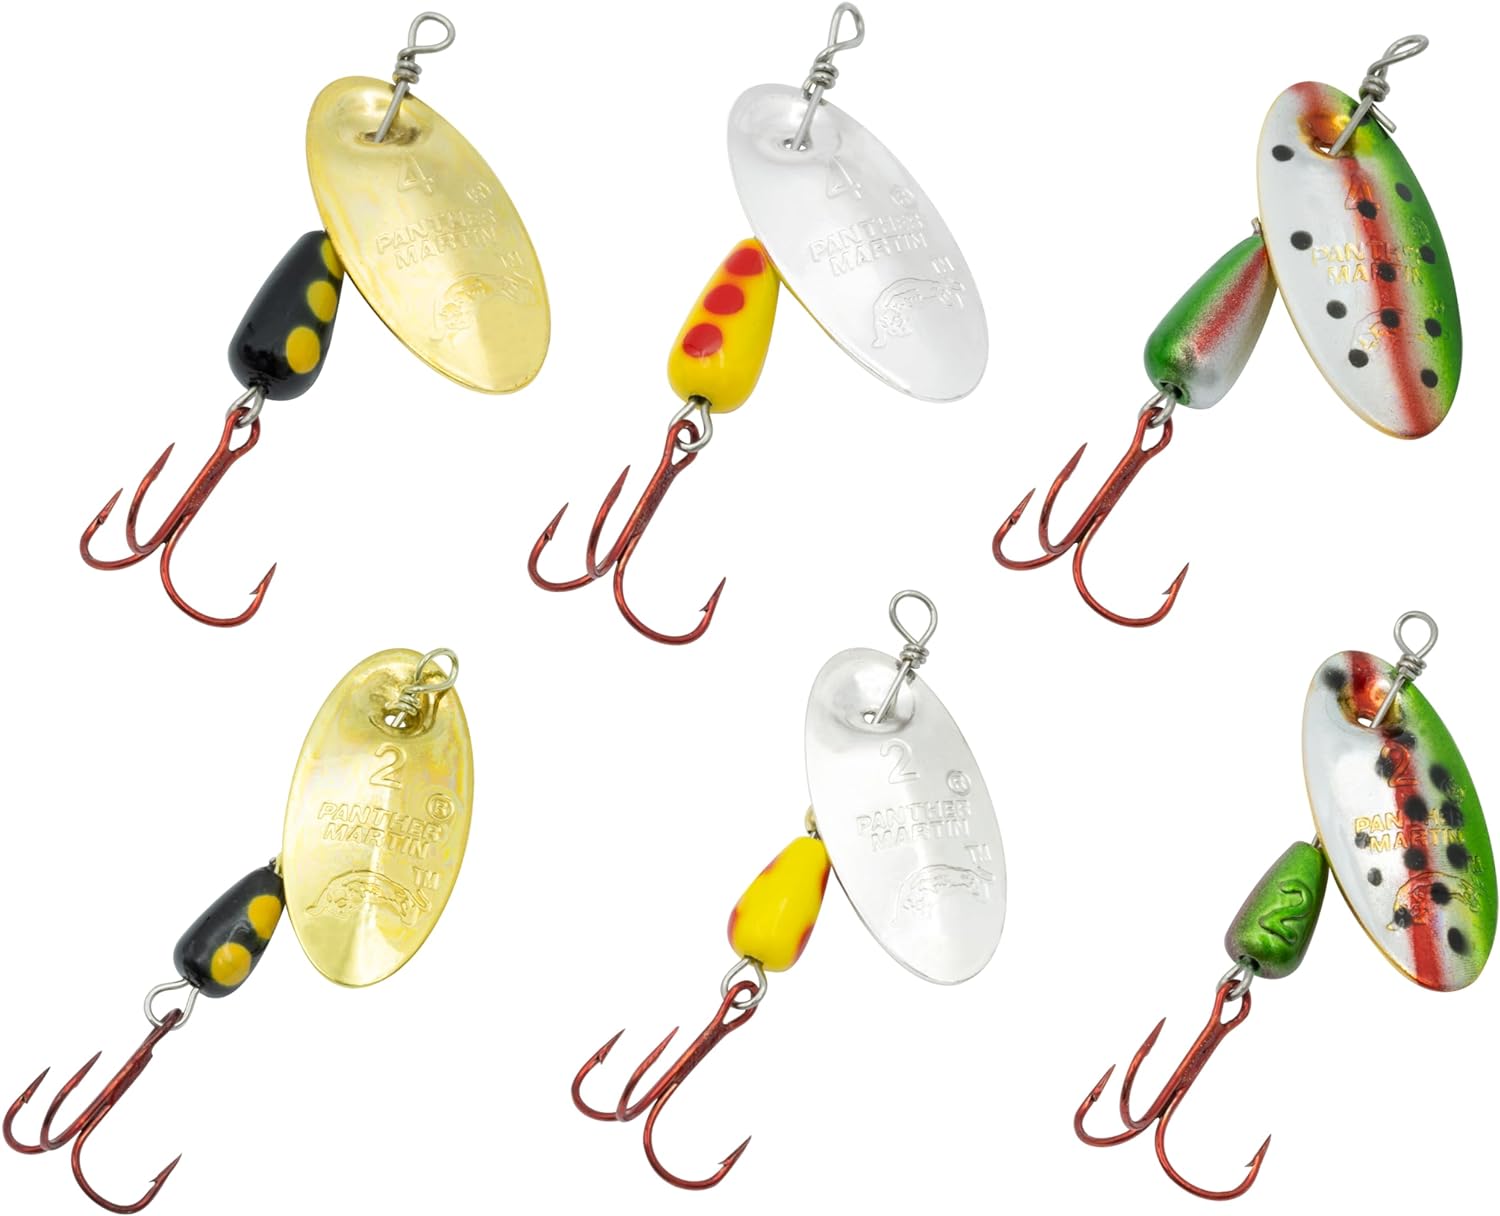 Panther Martin Spinner Trout Panfish Best of the Best Kit DSG6 Deadly